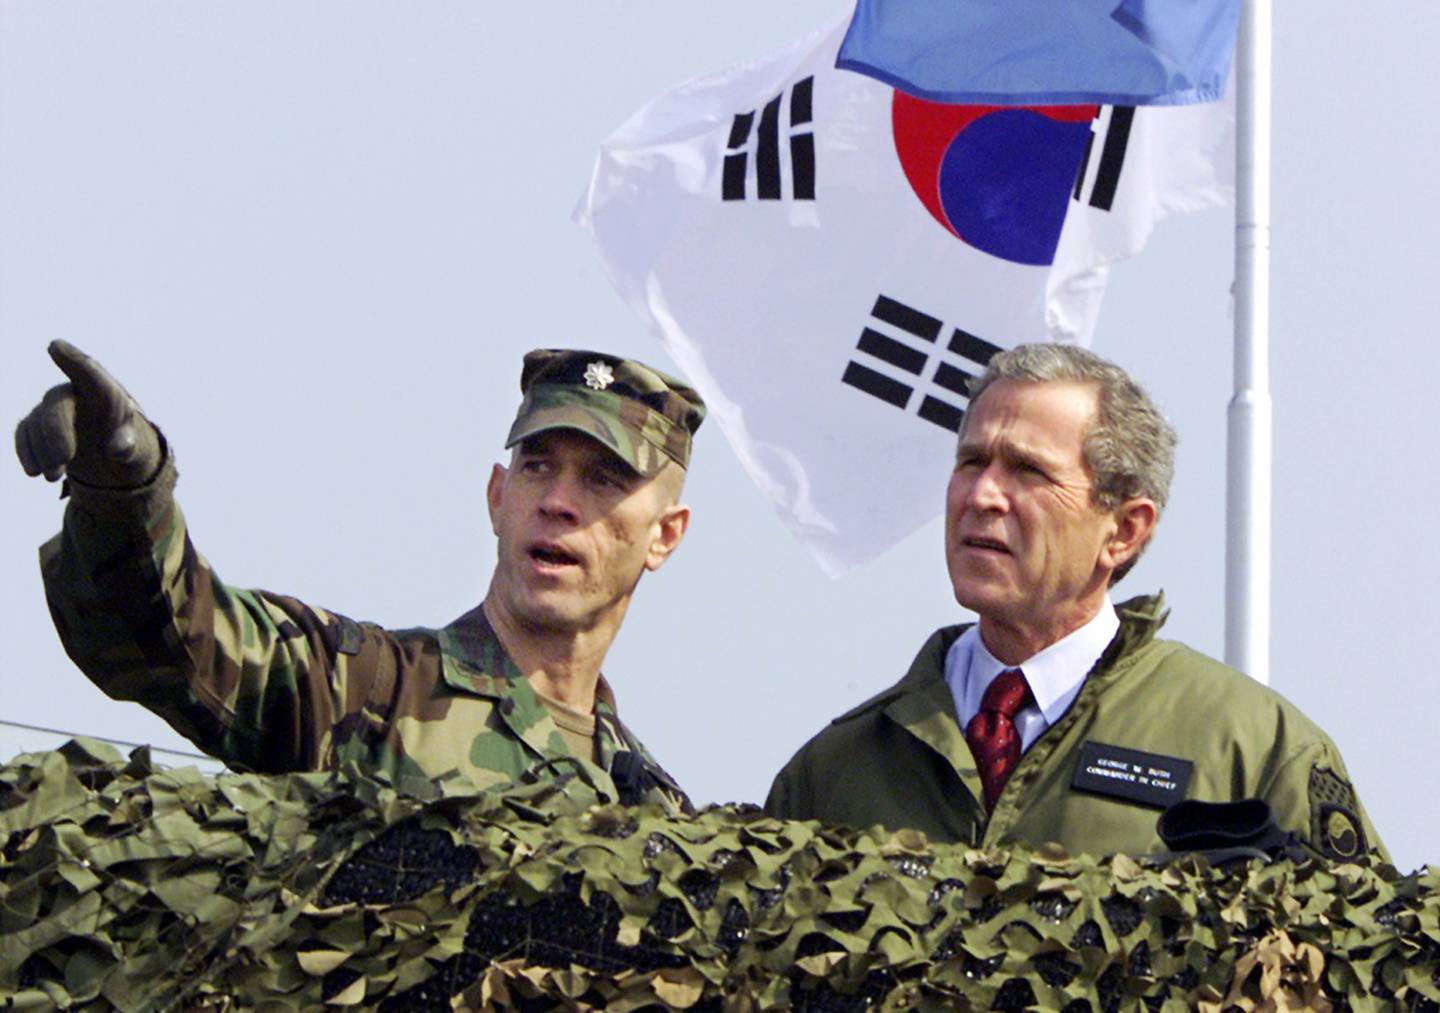 President George W. Bush, right, looks out at North Korea from Observation Point Ouellette in the Demilitarized Zone, the tense military border between the two Koreas, in Panmunjom, Korea, on Feb. 20, 2002.